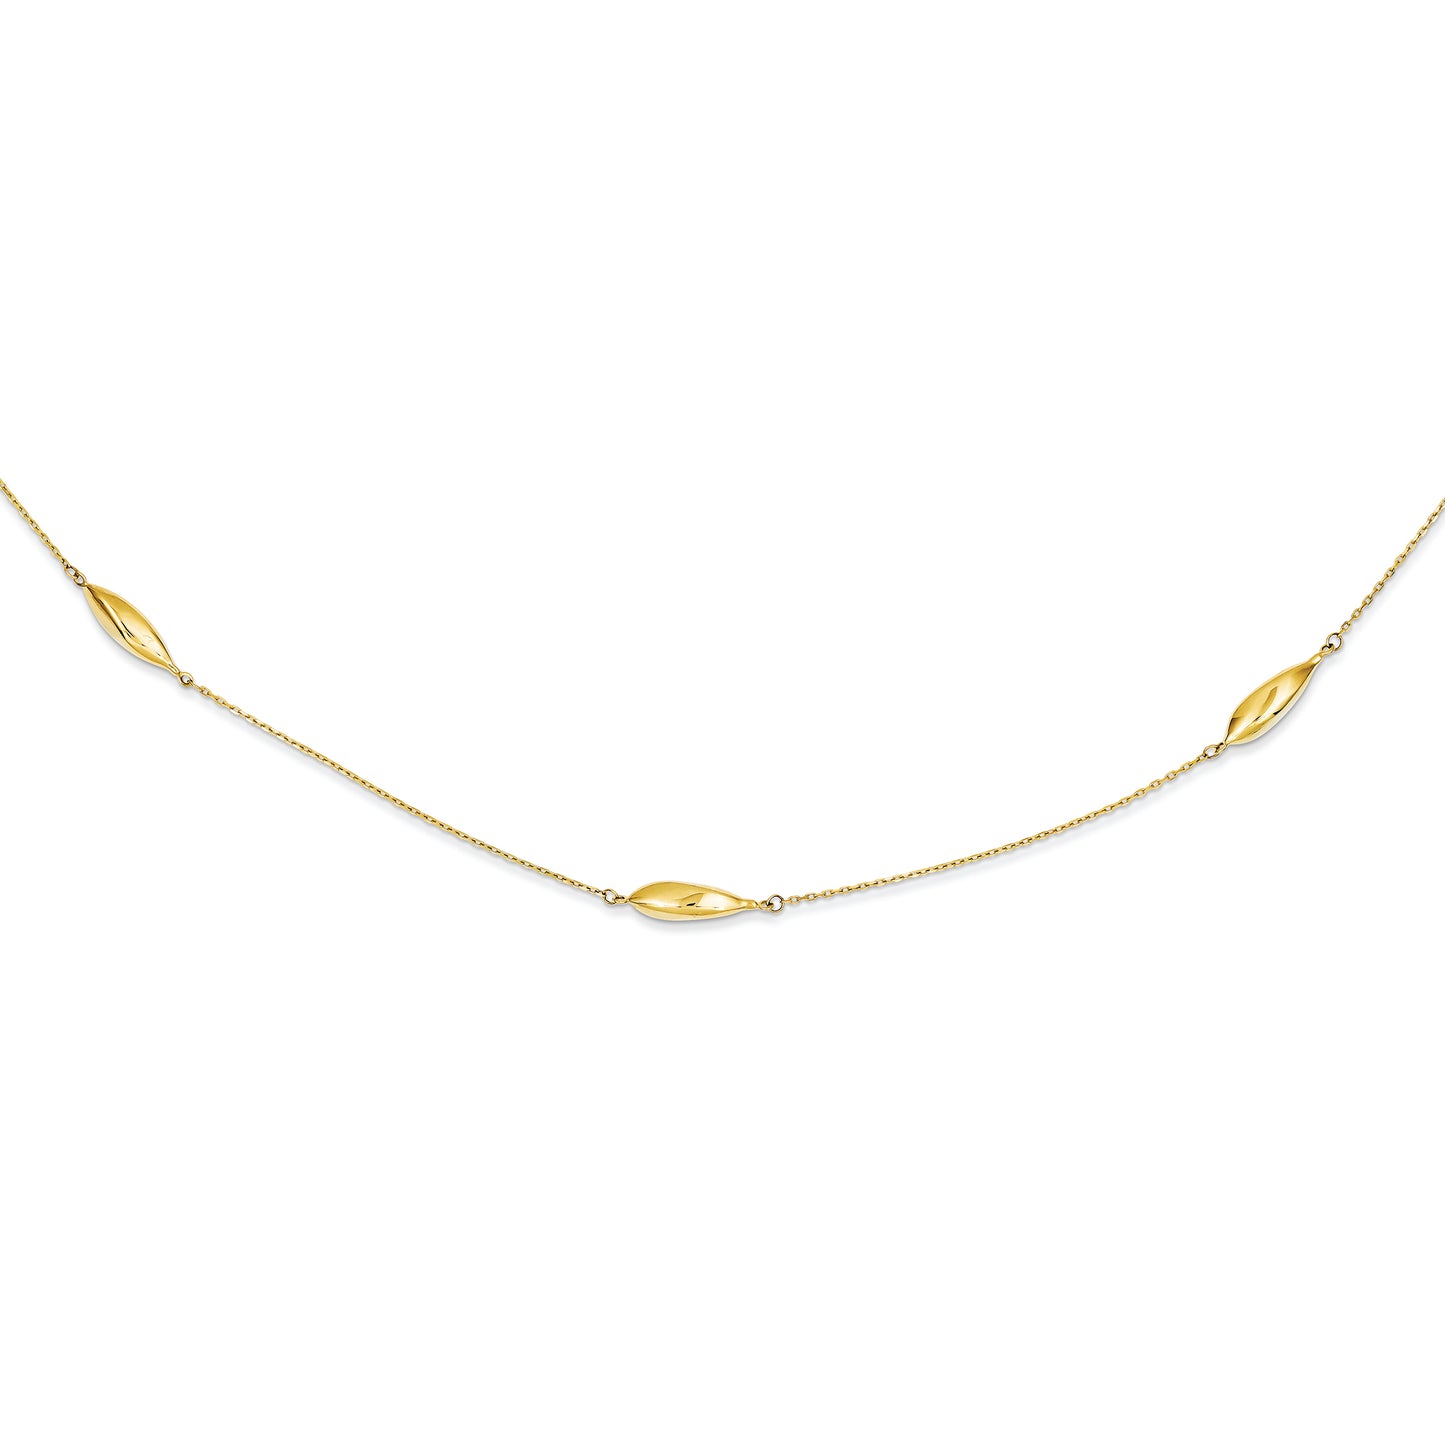 14K Gold Polished Oblong Bead Necklace 17 Inches